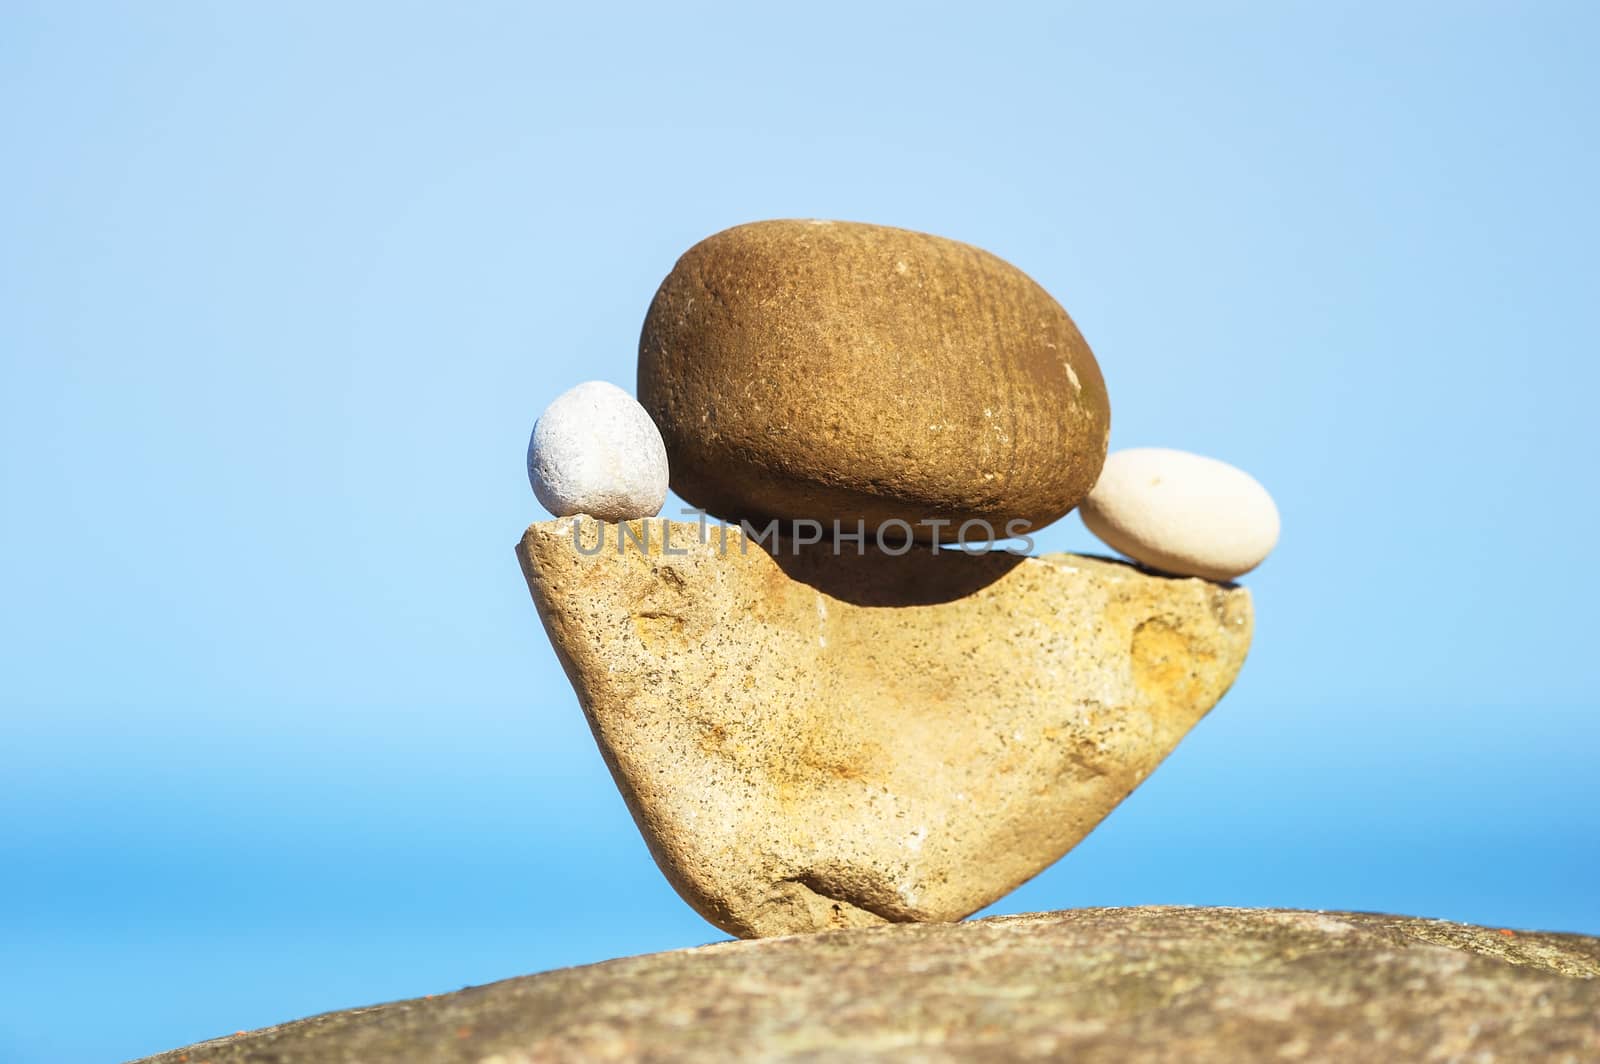 Balancing of stones by styf22